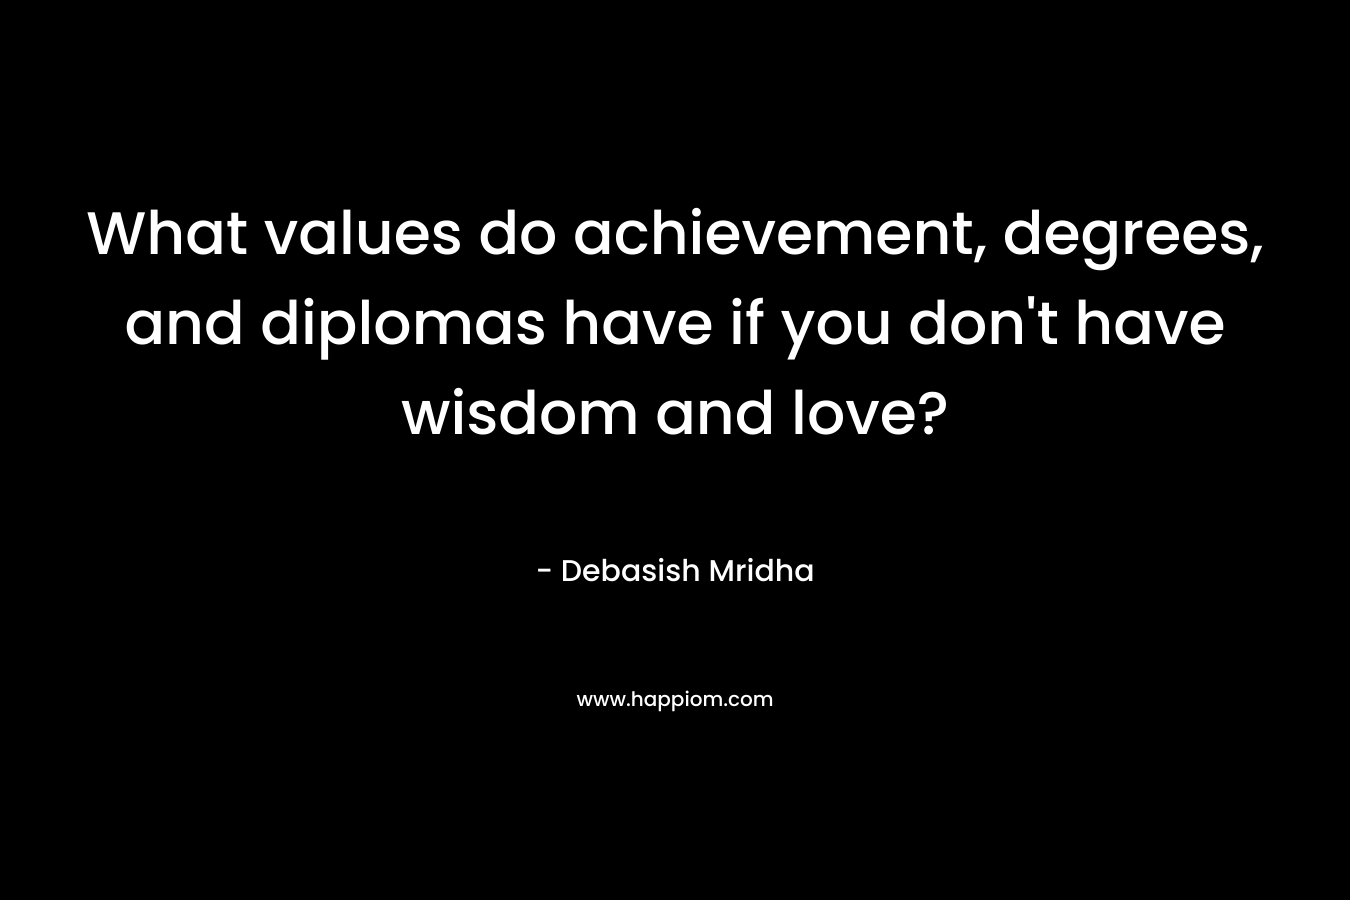 What values do achievement, degrees, and diplomas have if you don't have wisdom and love?